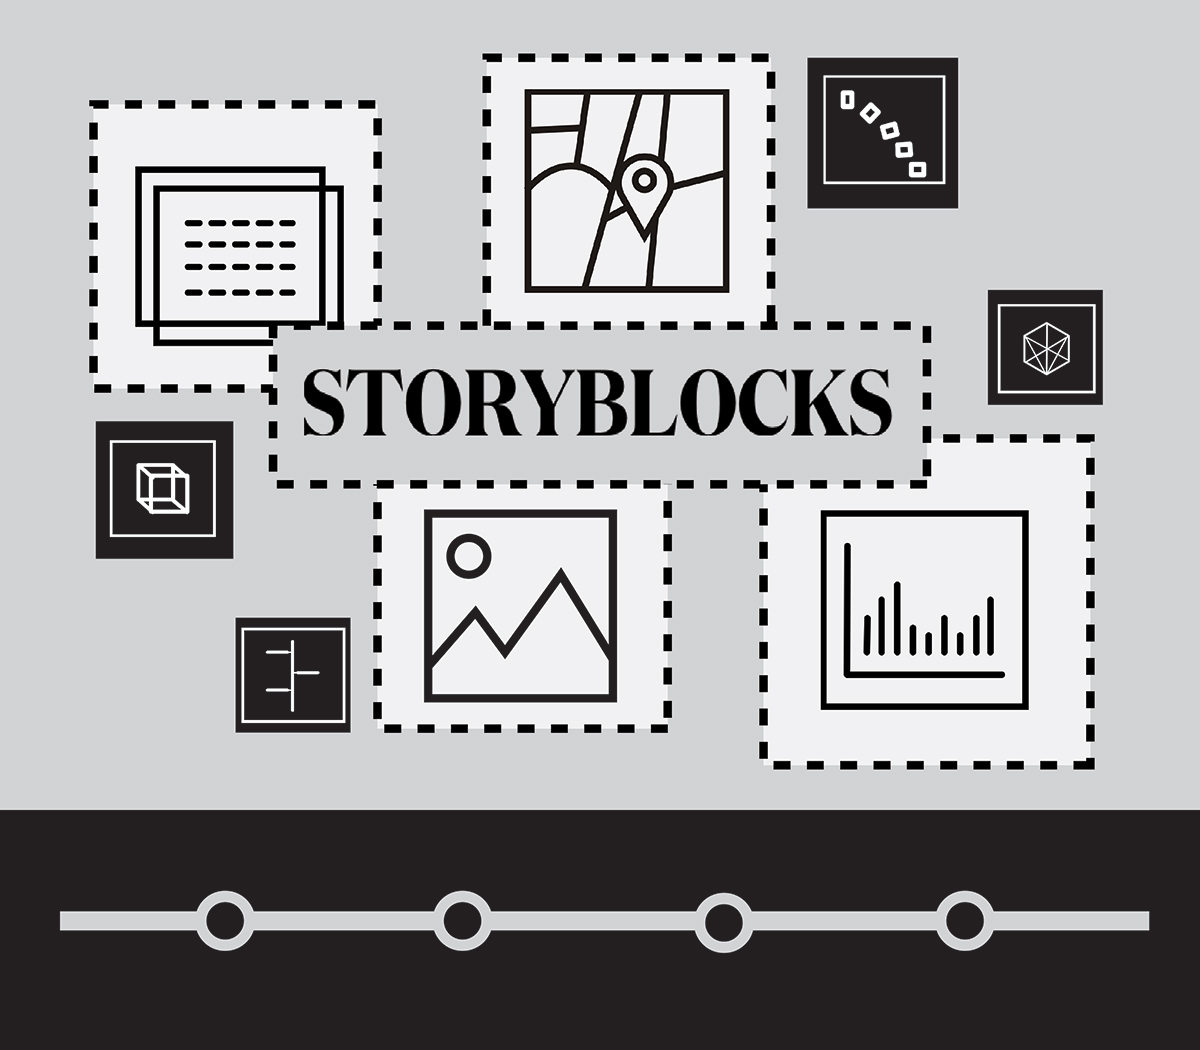 a graphical interface called Storyblocks